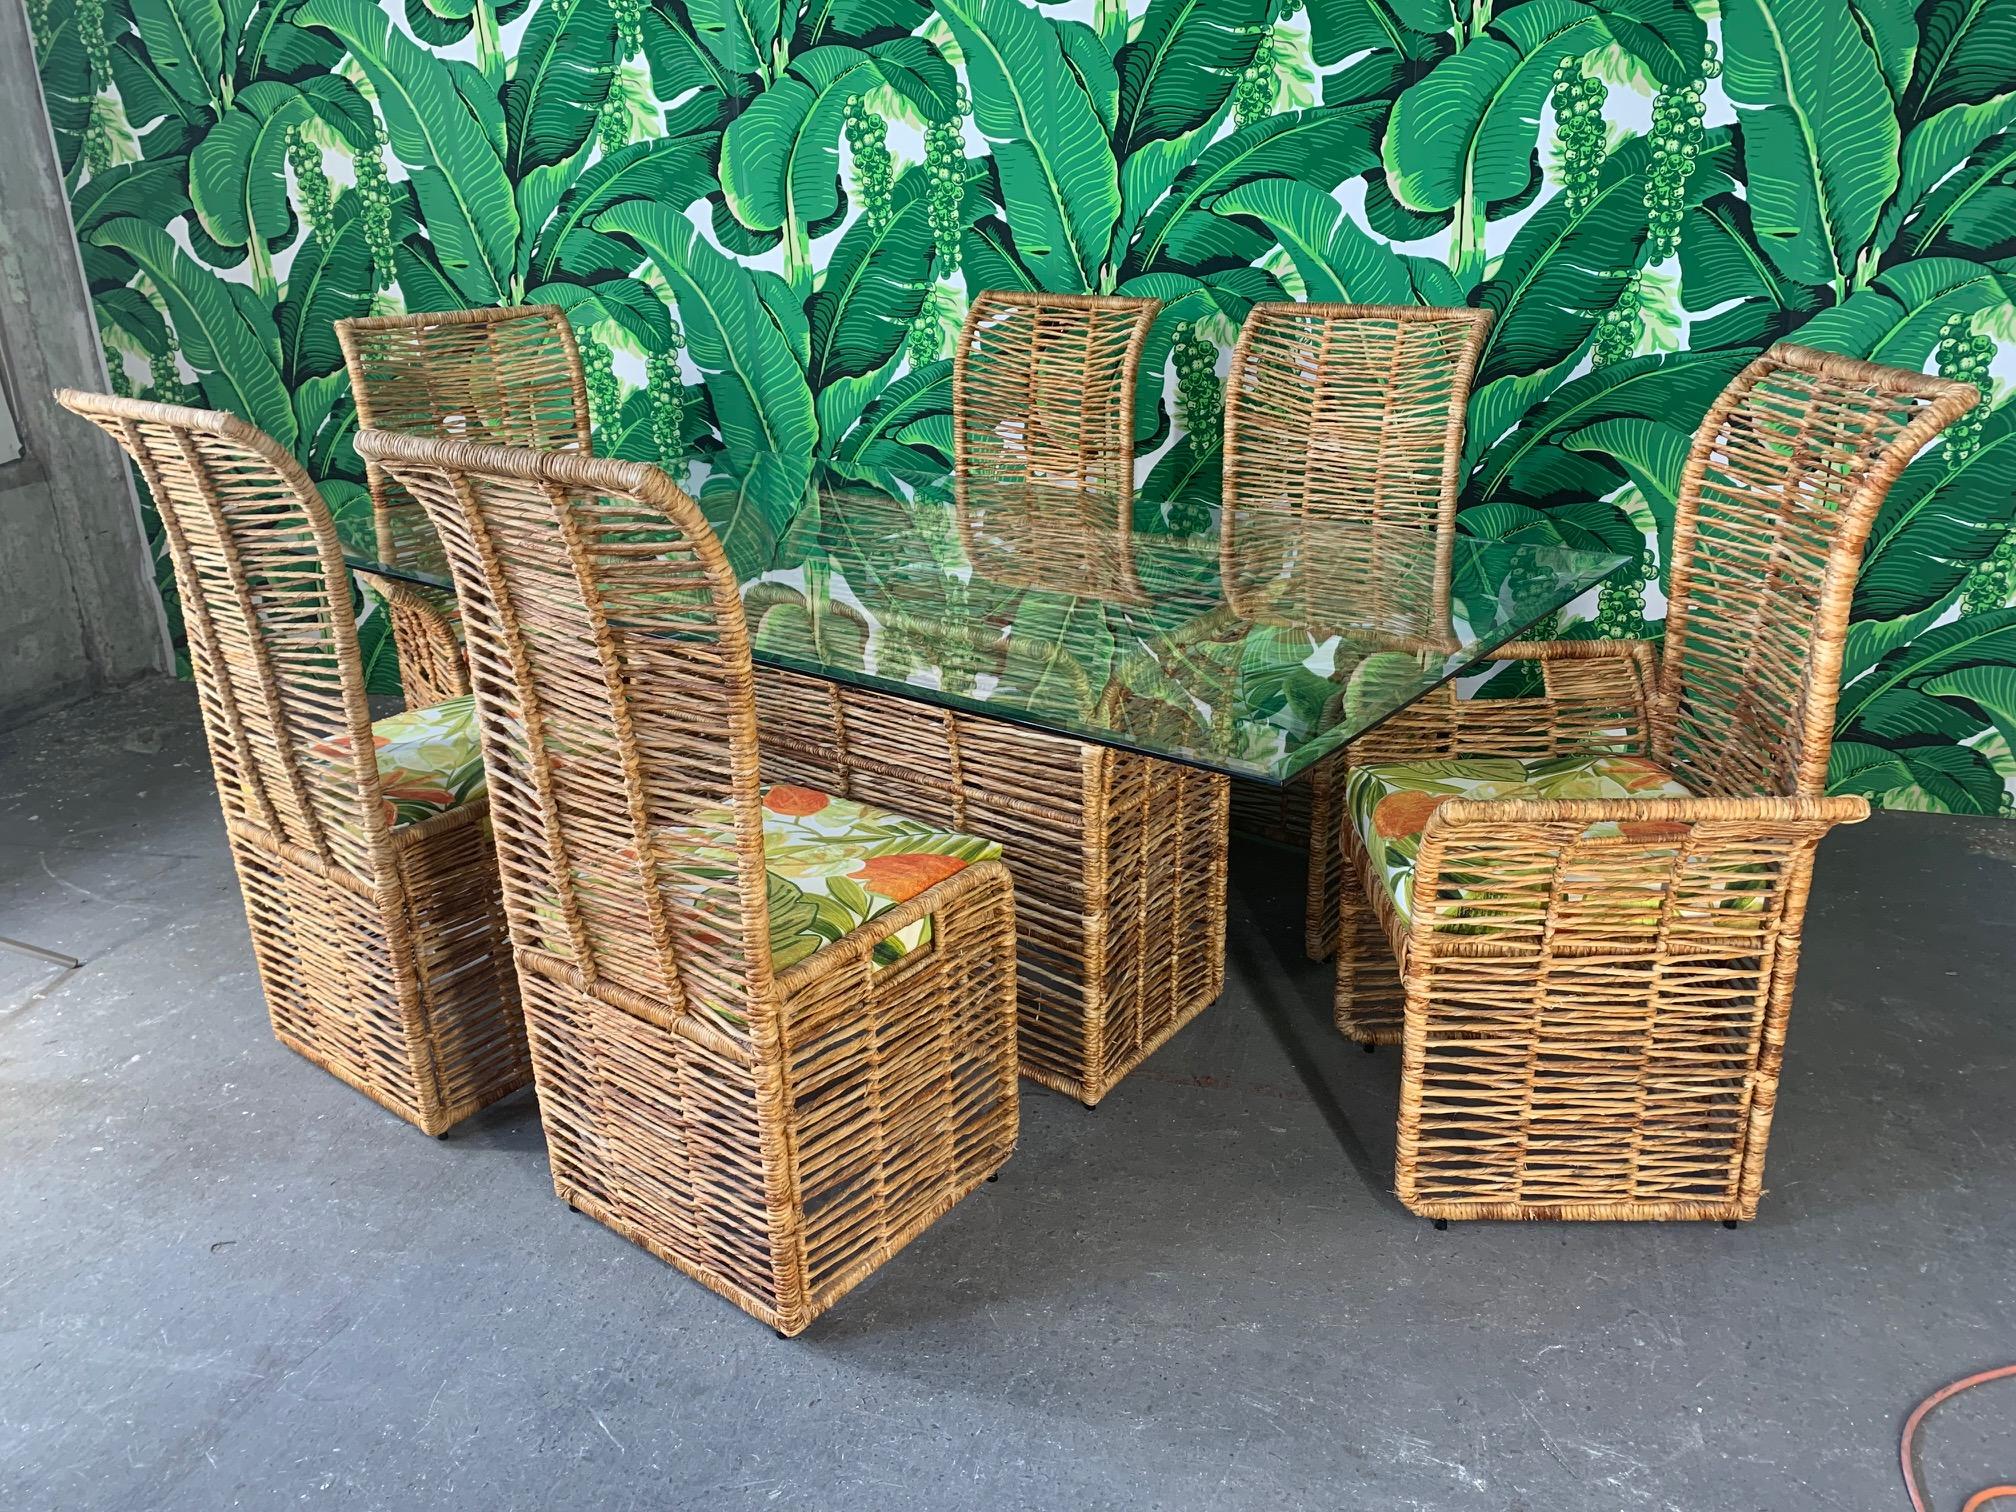 Unique dining set consists of 6 rattan rope wrapped dining chairs upholstered in a tropical palm leaf print and matching pedestal table with glass top. Steel frame construction, heavy and sturdy. Two arm chairs and four side chairs. Very good